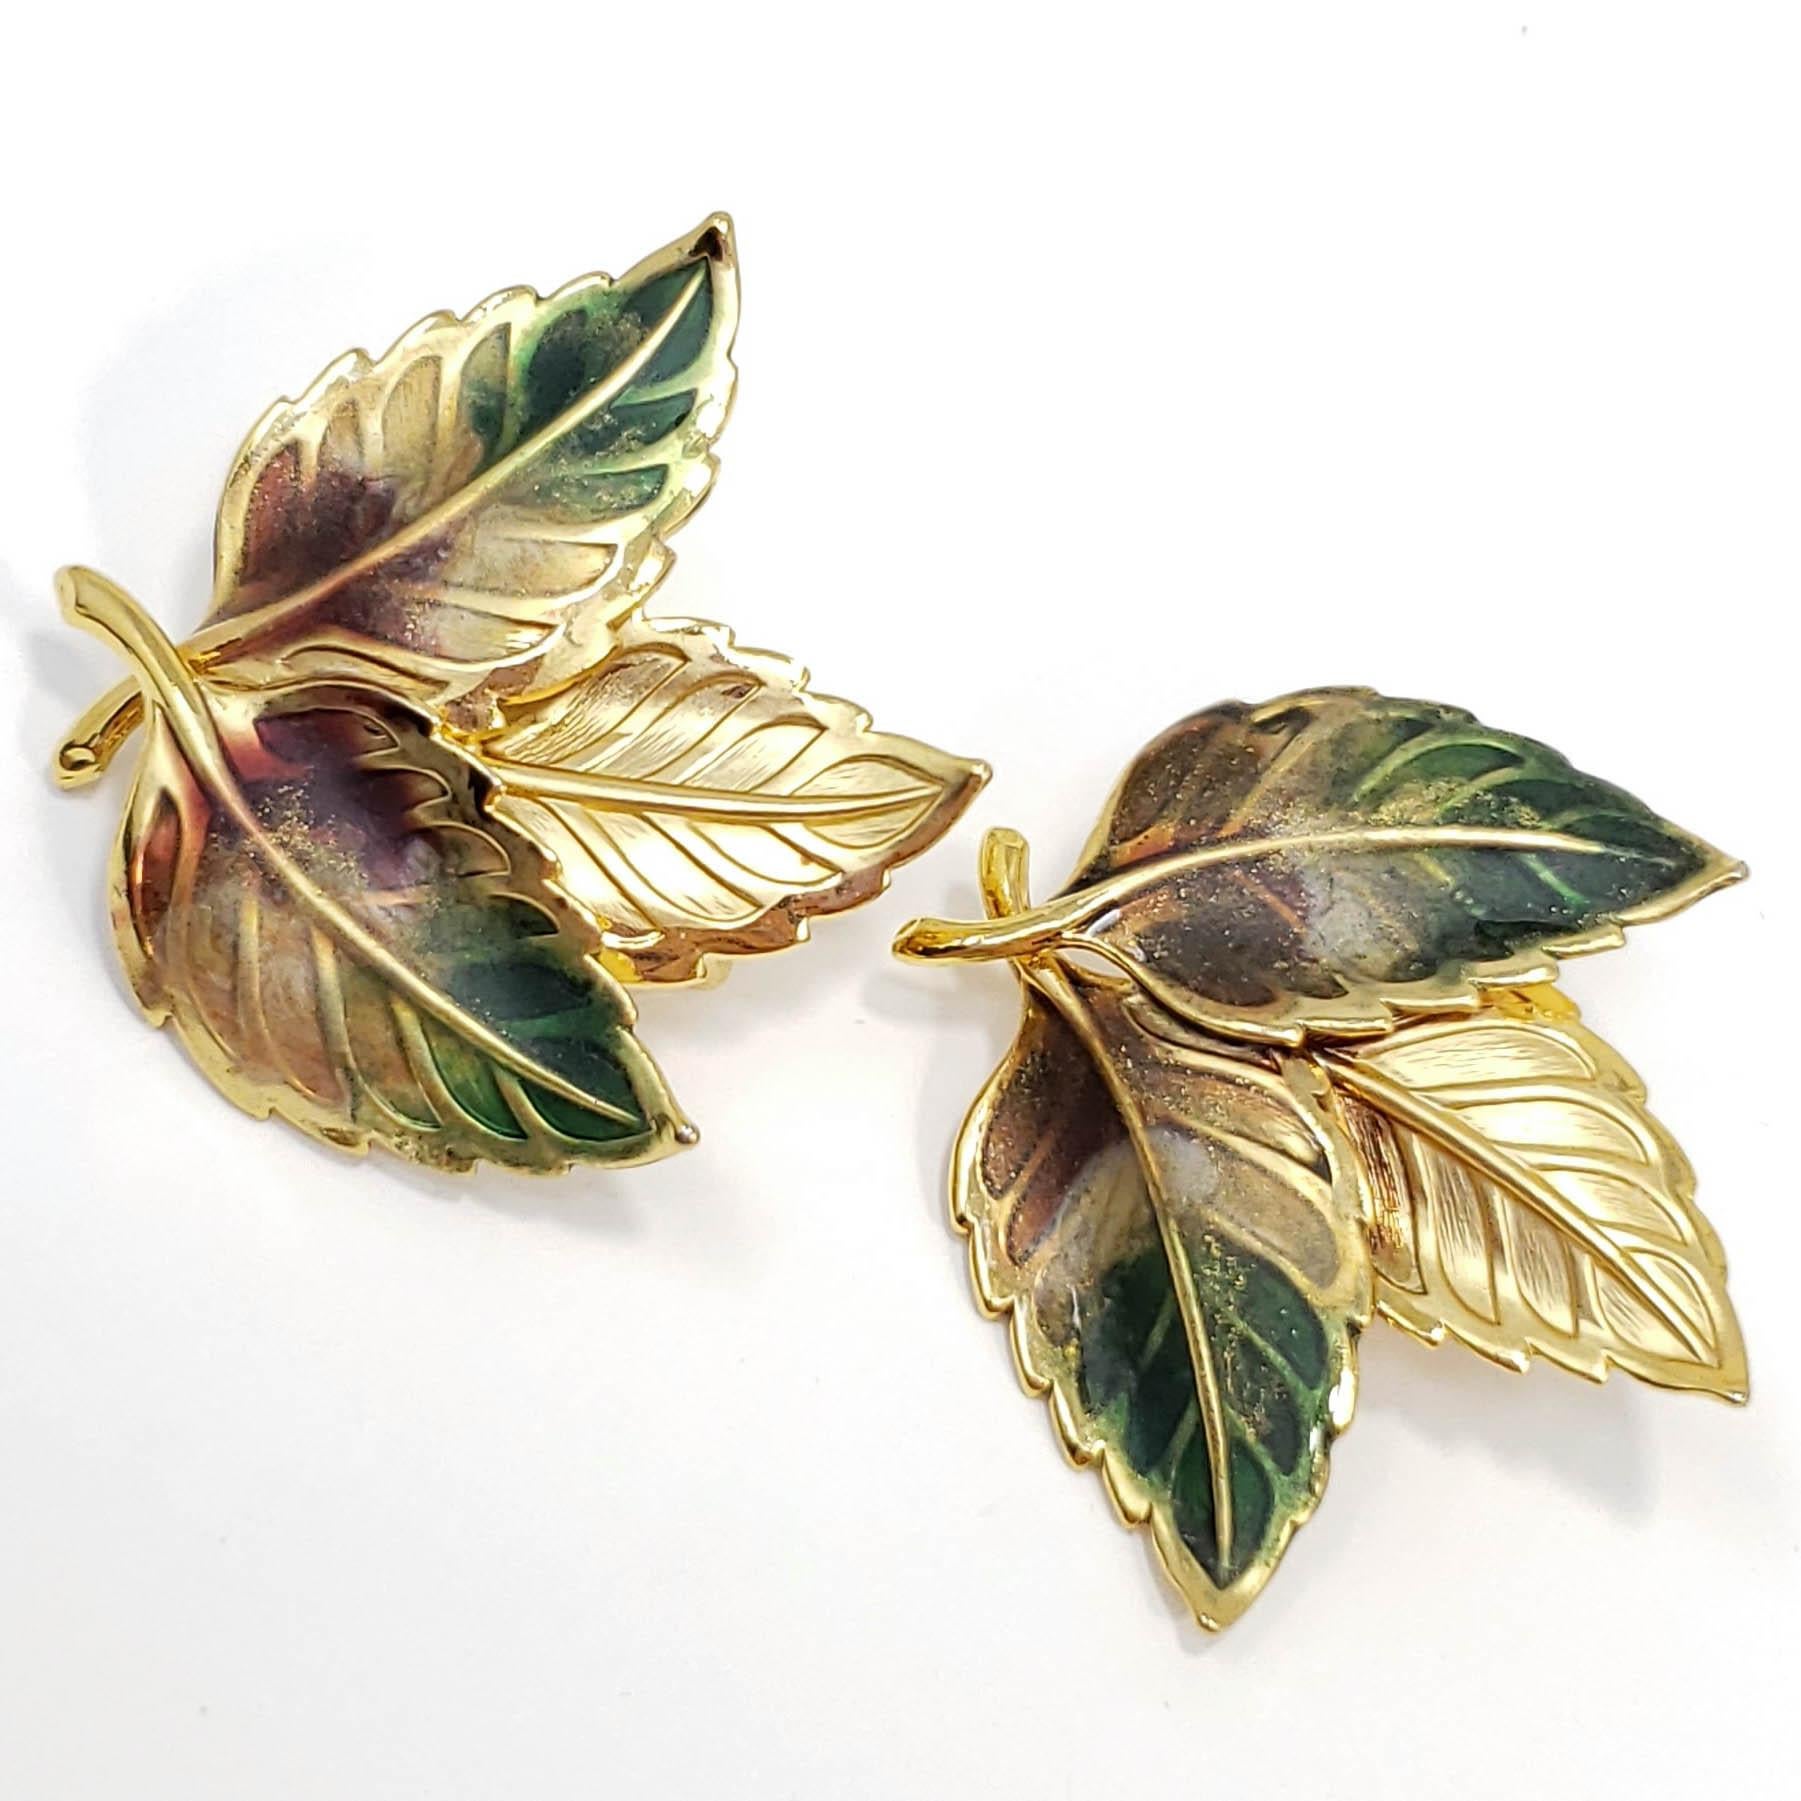 A pair of vintage floral-themed earrings. Three delicate leaves, painted in green and brown on a goldtone metal setting. A classic style to accentuate your natural beauty!

Excellent condition. Circa mid 1900s.